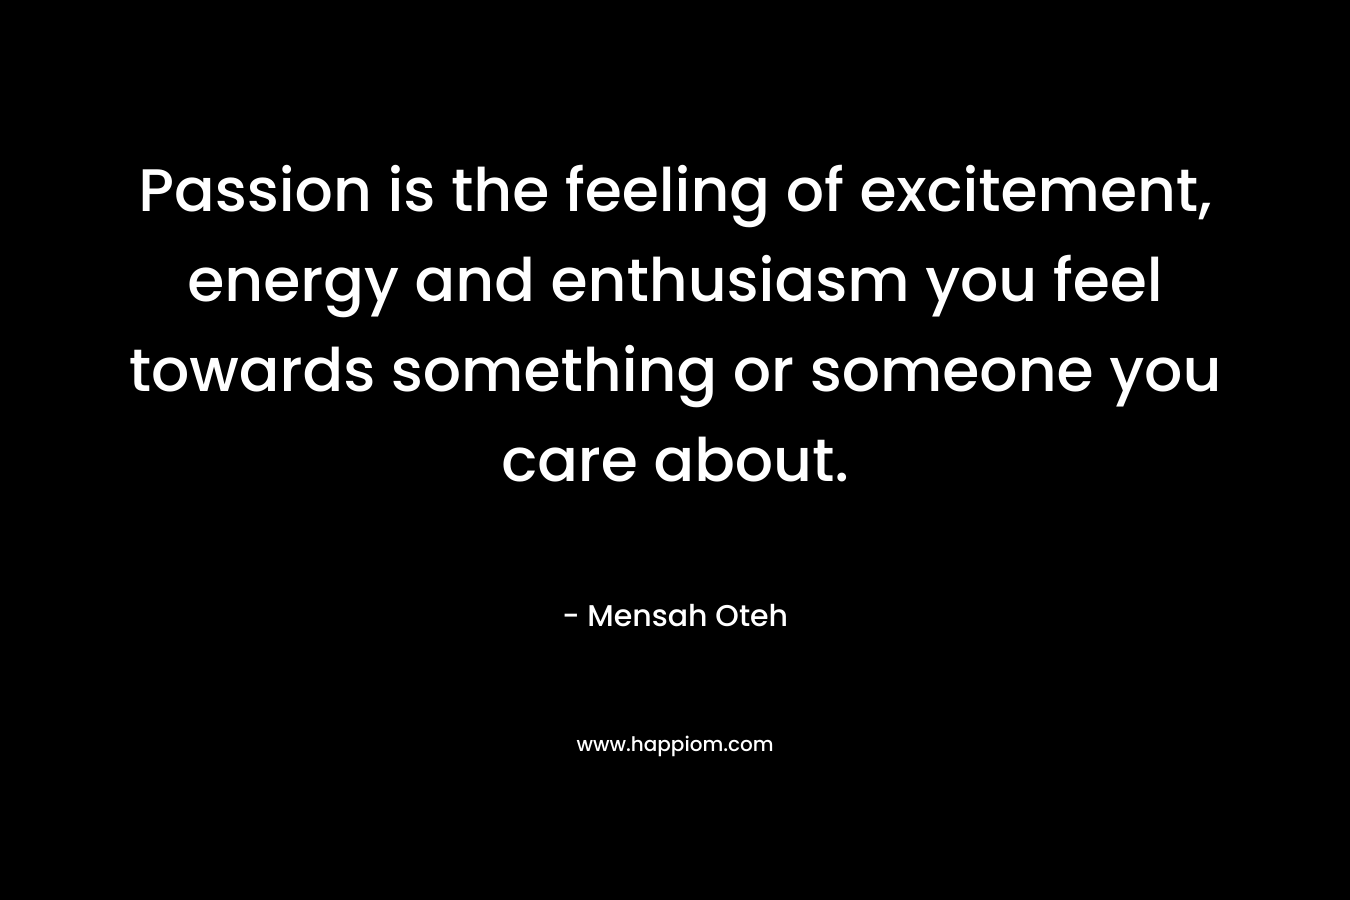 Passion is the feeling of excitement, energy and enthusiasm you feel towards something or someone you care about.